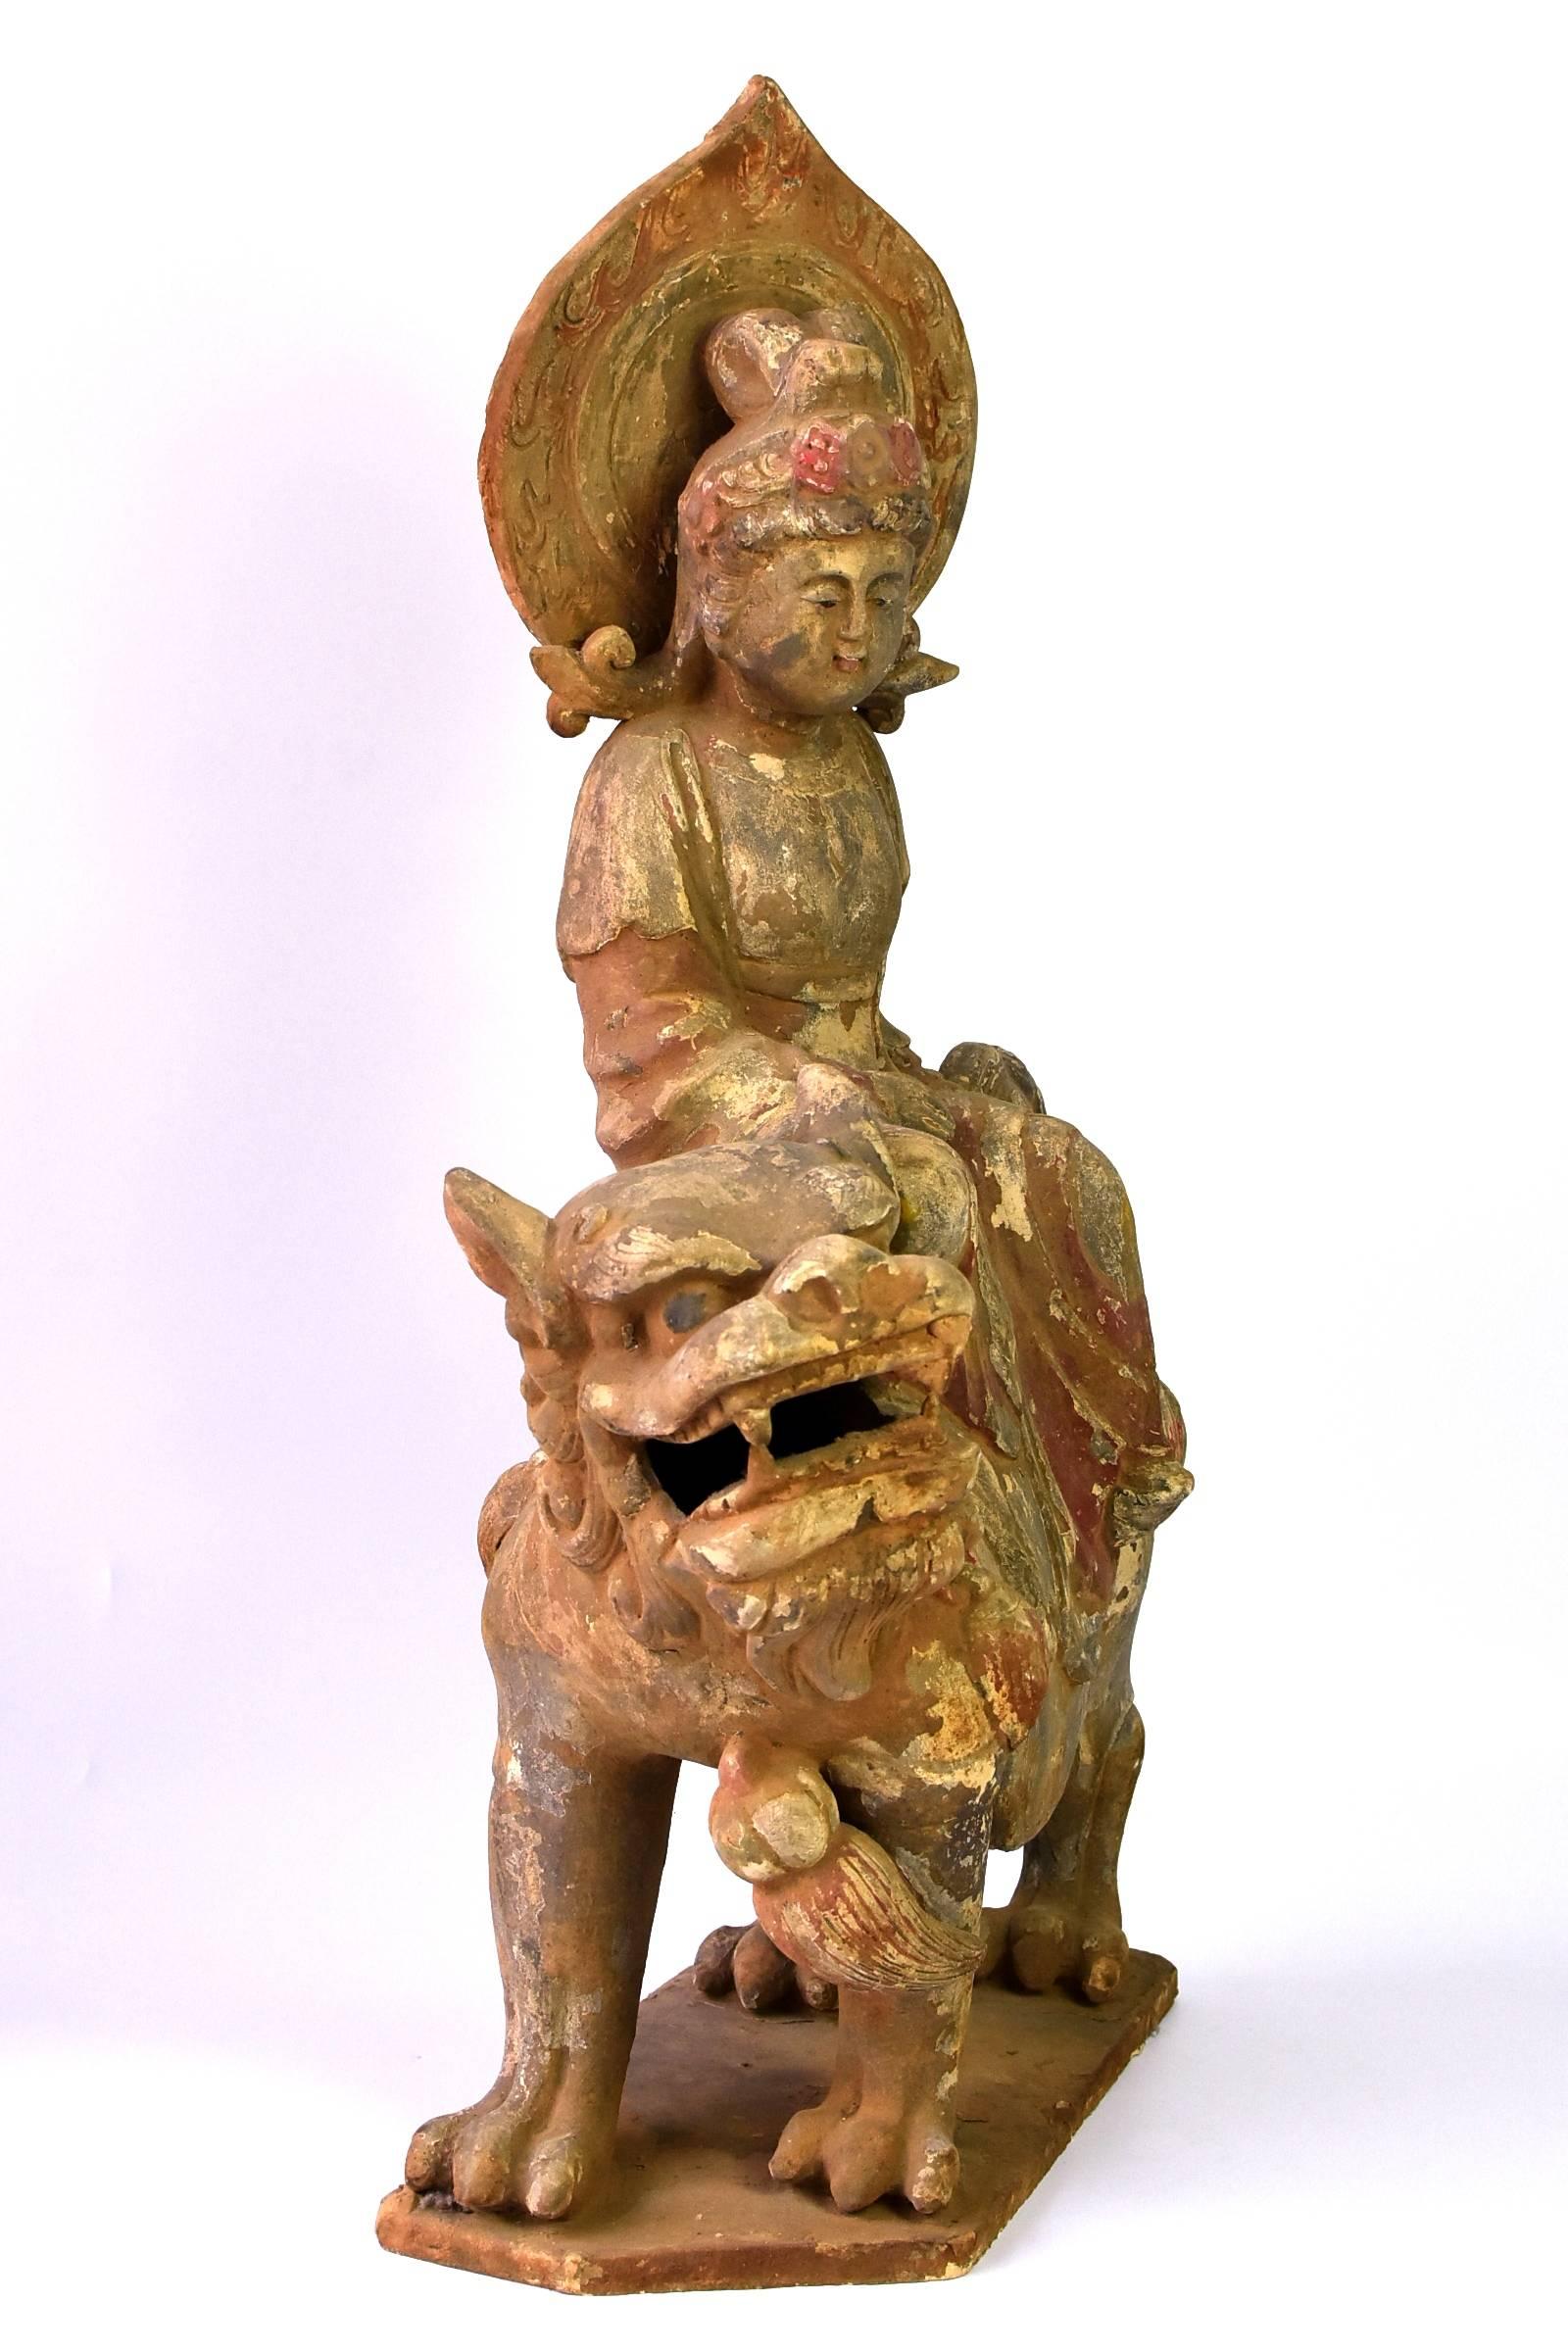 A fantastic terracotta piece featuring Bodhisattva Wen Shu on her lion ride. Wen Shu, one of the four great Bodhisattva, is The Bodhisattva of Wisdom, with the particular quality representing deep understanding of life's philosophy and power to